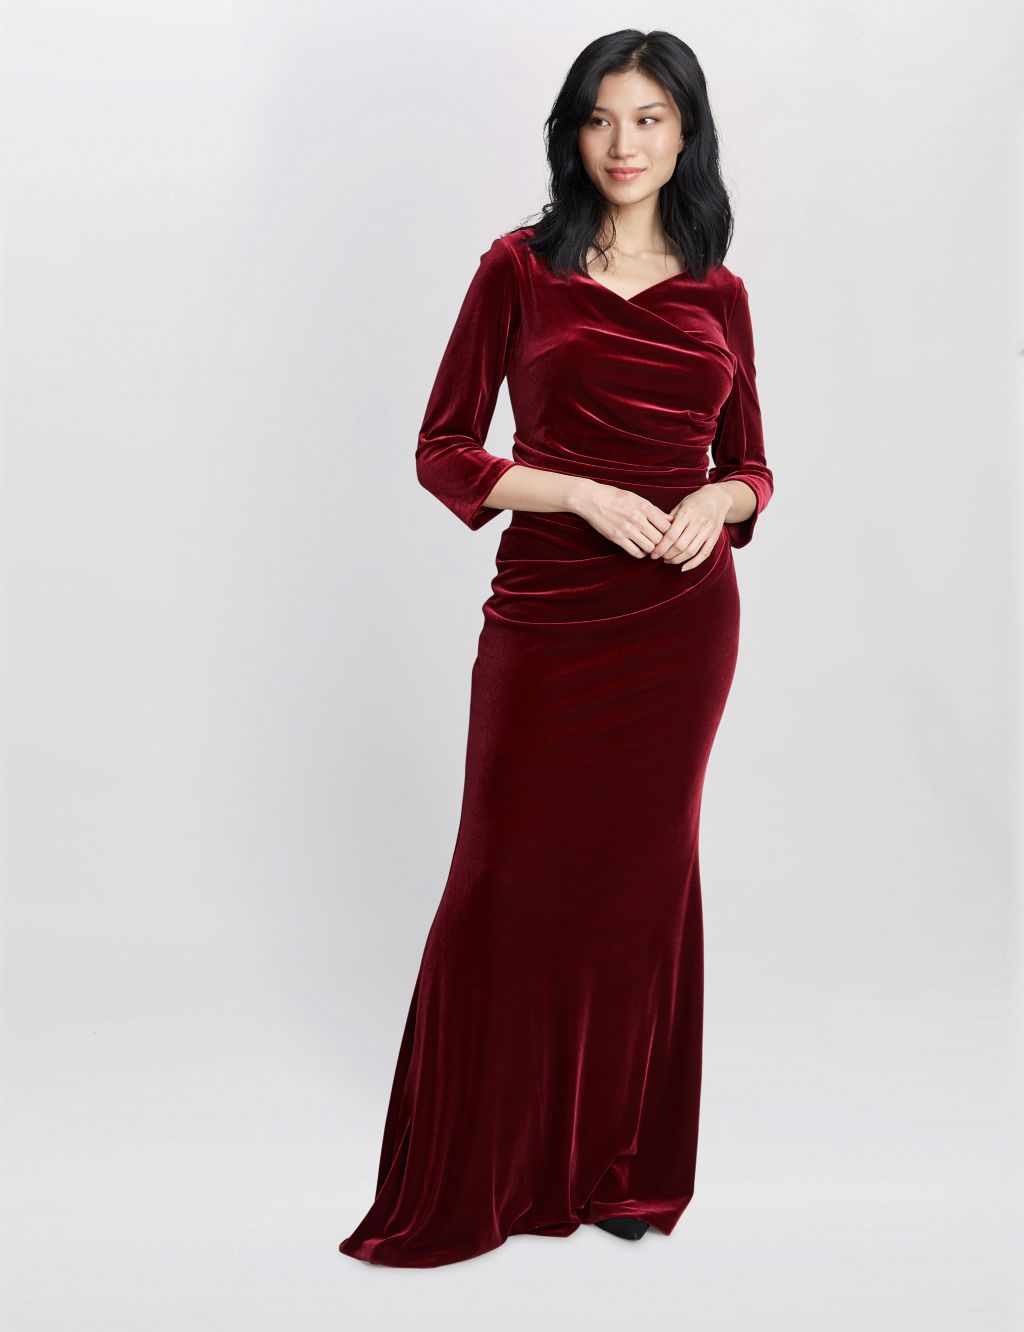 B243018_Charming Stretch Velvet A-line Boho Gown with Cowl